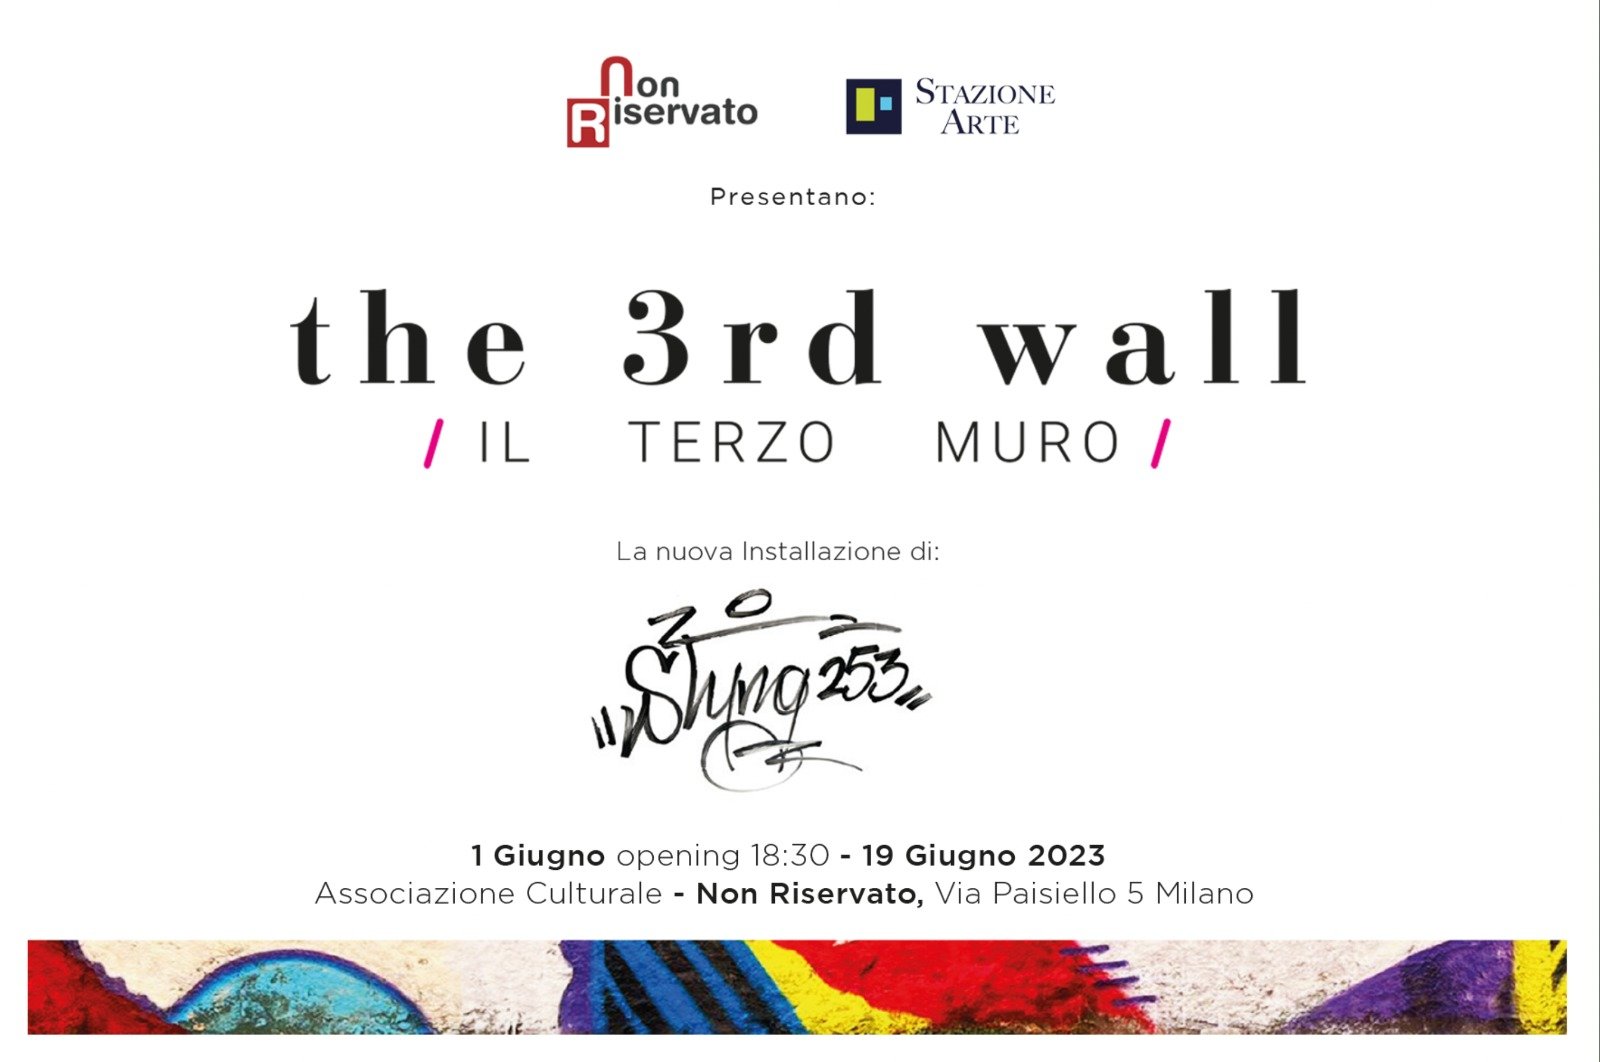 Styng 253 - The 3rd Wall